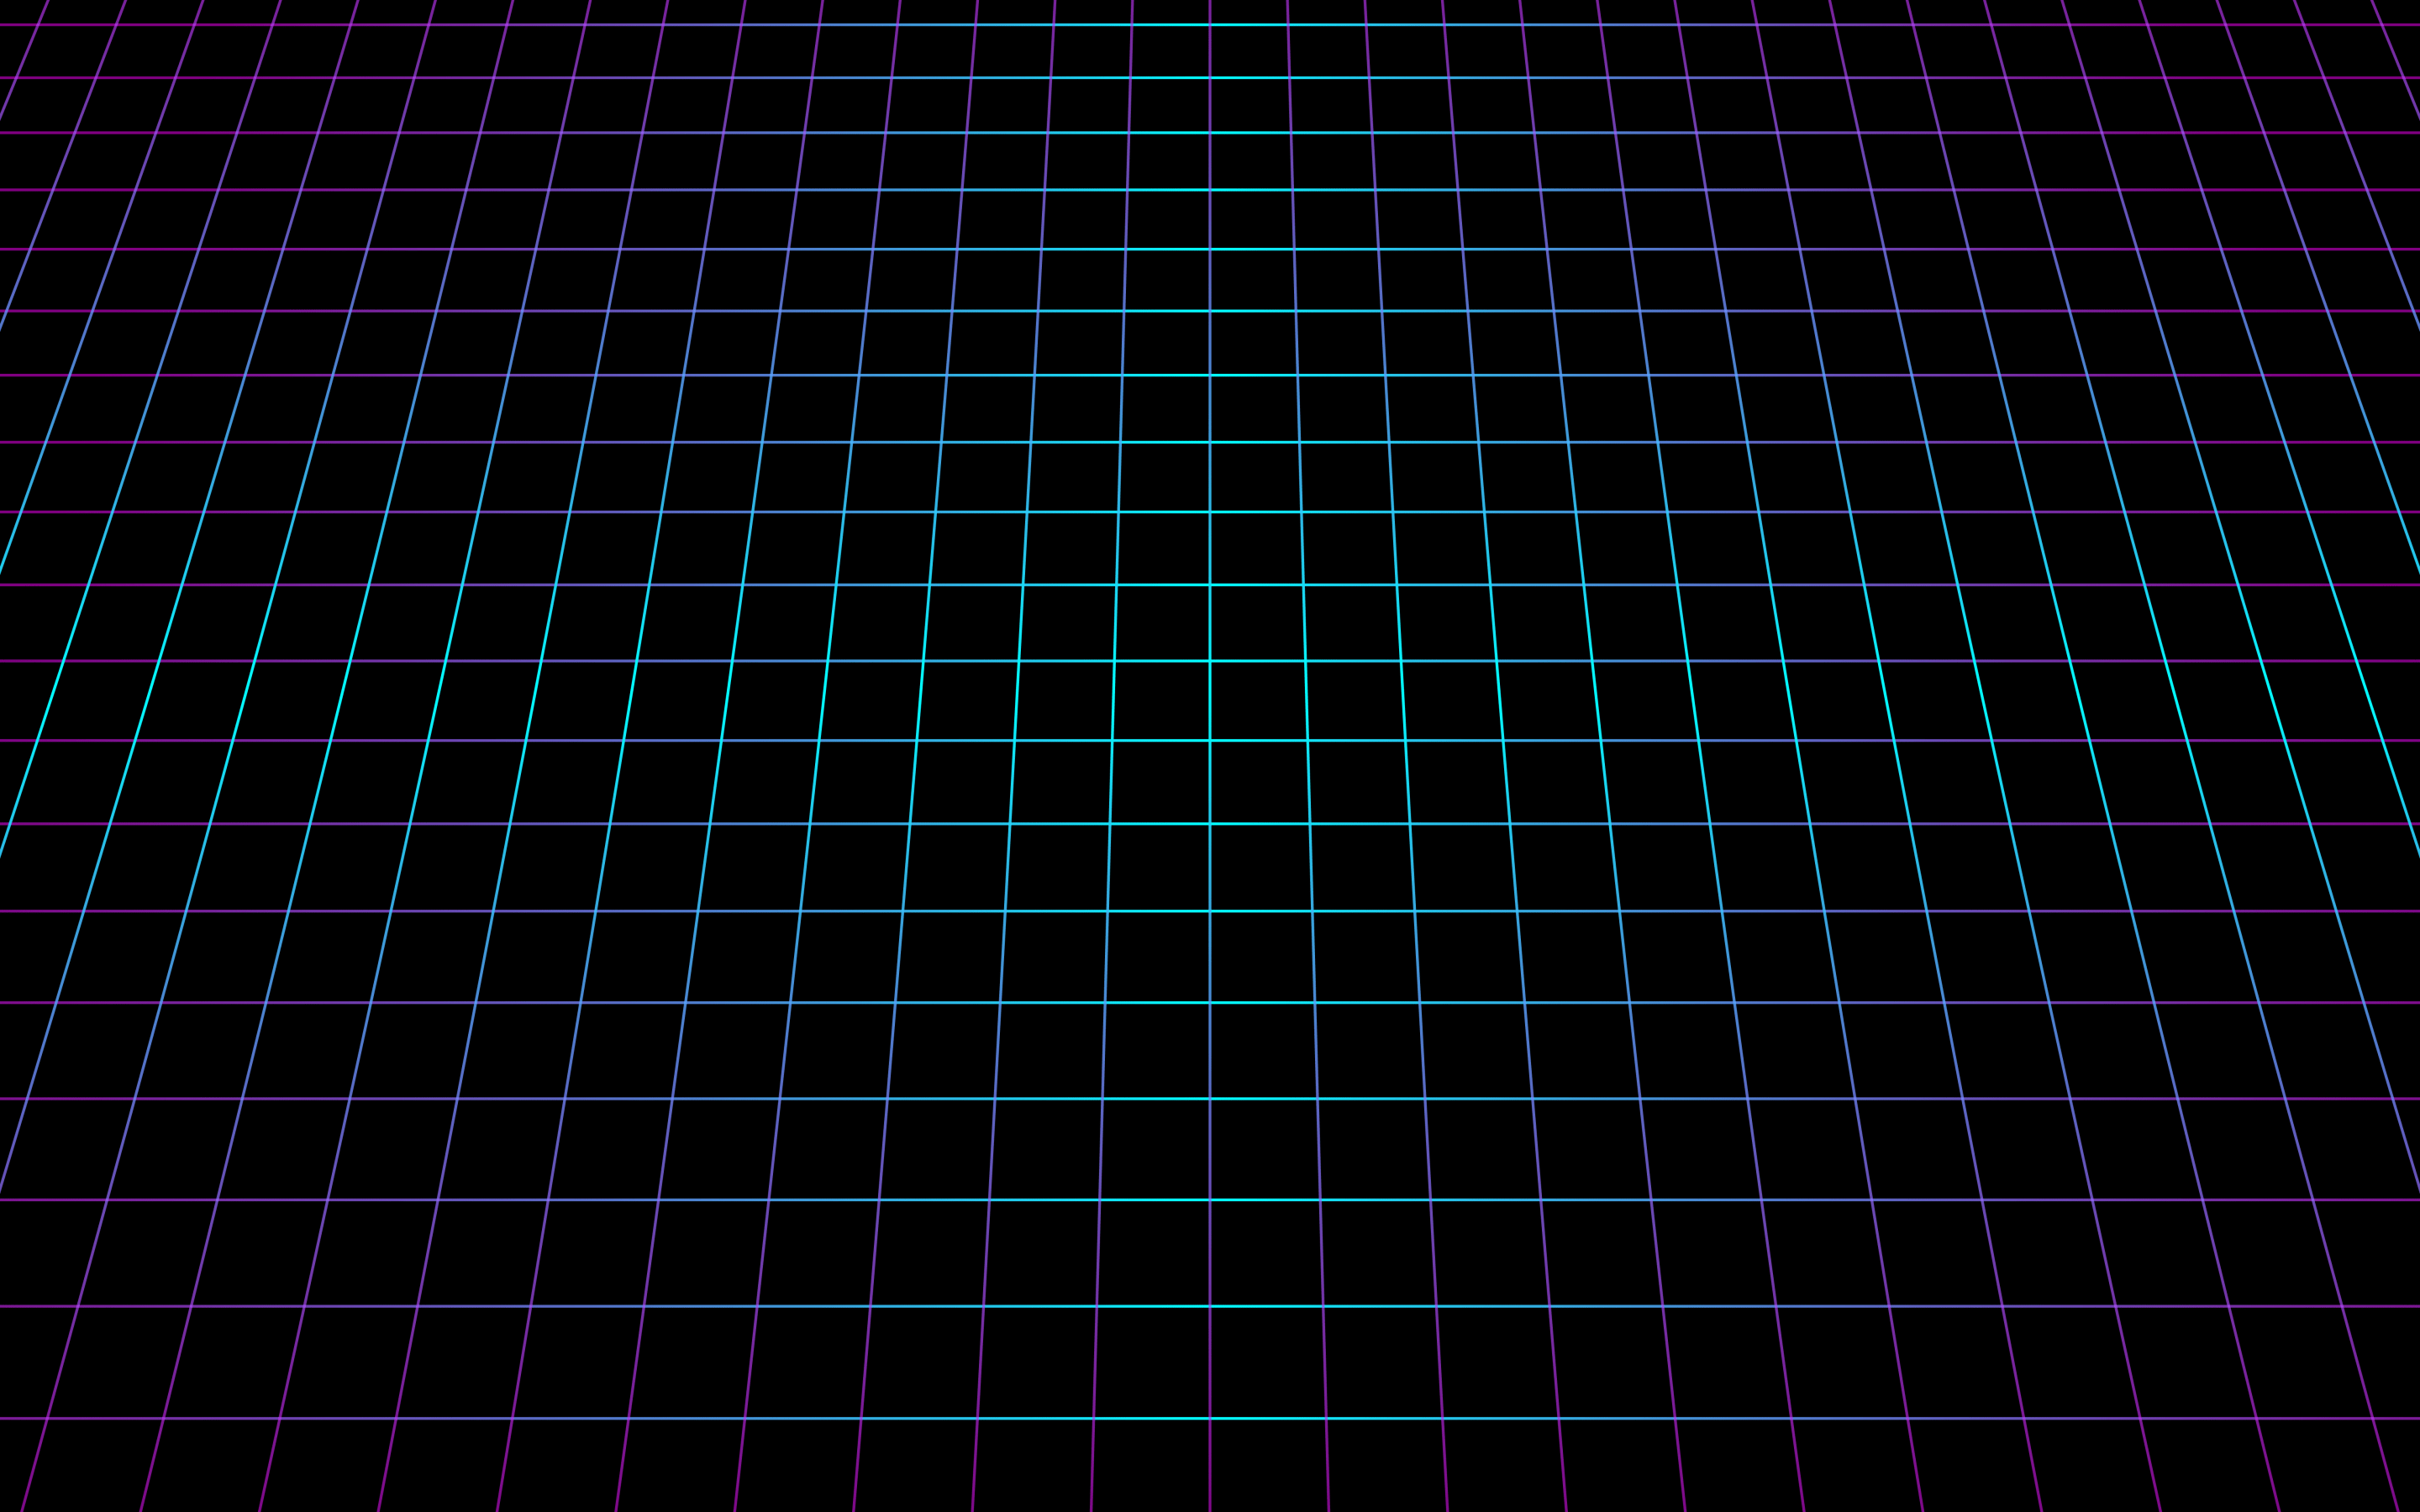 A purple and blue gradient line grid on a black background - Grid